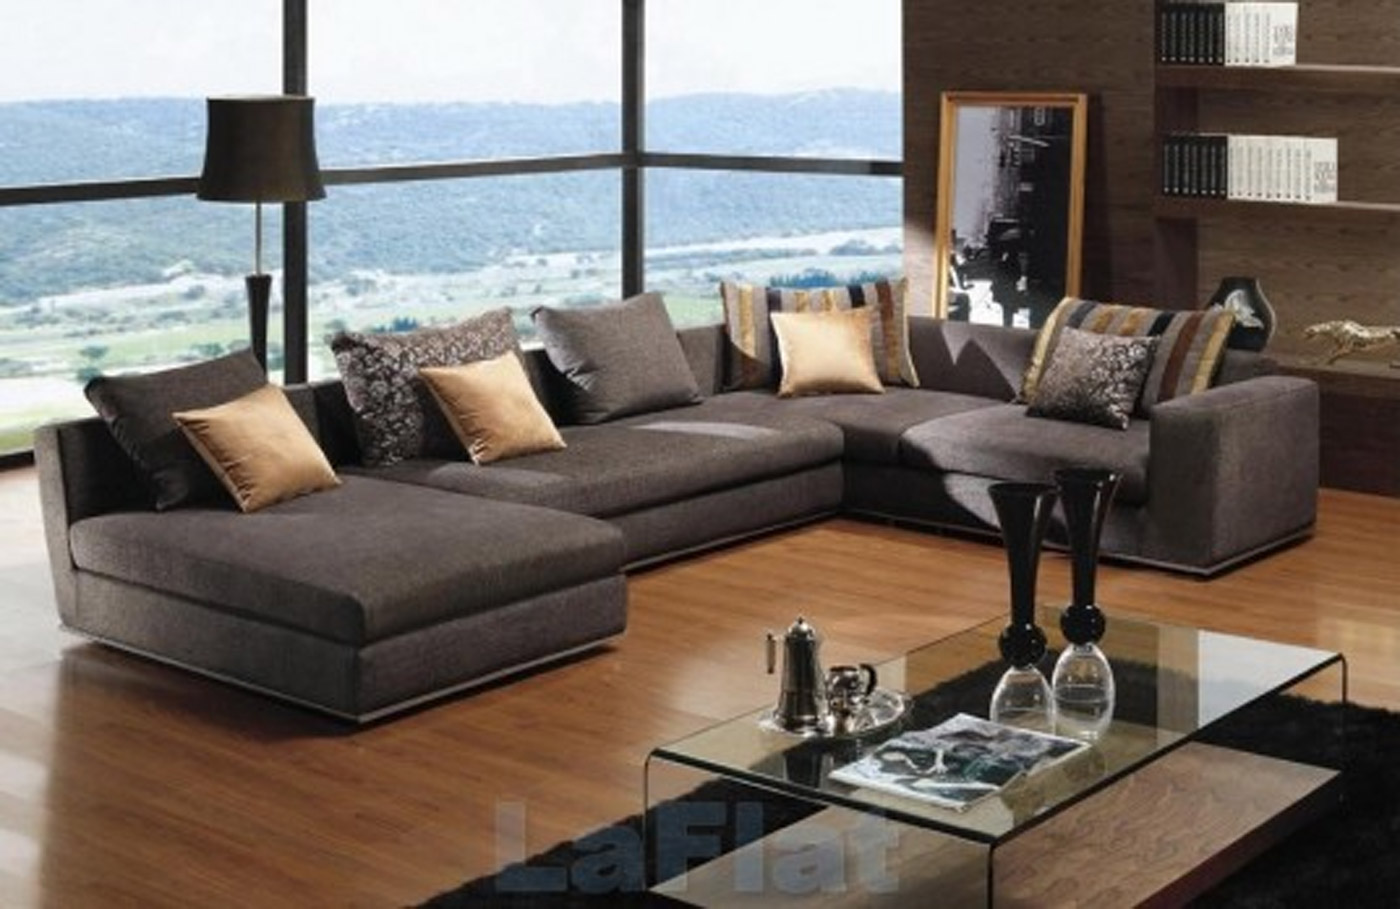 Living Room Studio Glamorous Living Room Furniture For Studio Apartments Design Ideas With Rustic Light Brown Wooden Floor Idea Along With Modern Grey Colored Sofa Sets For Small Living Rooms Living Room Find Suitable Living Room Furniture With Your Style